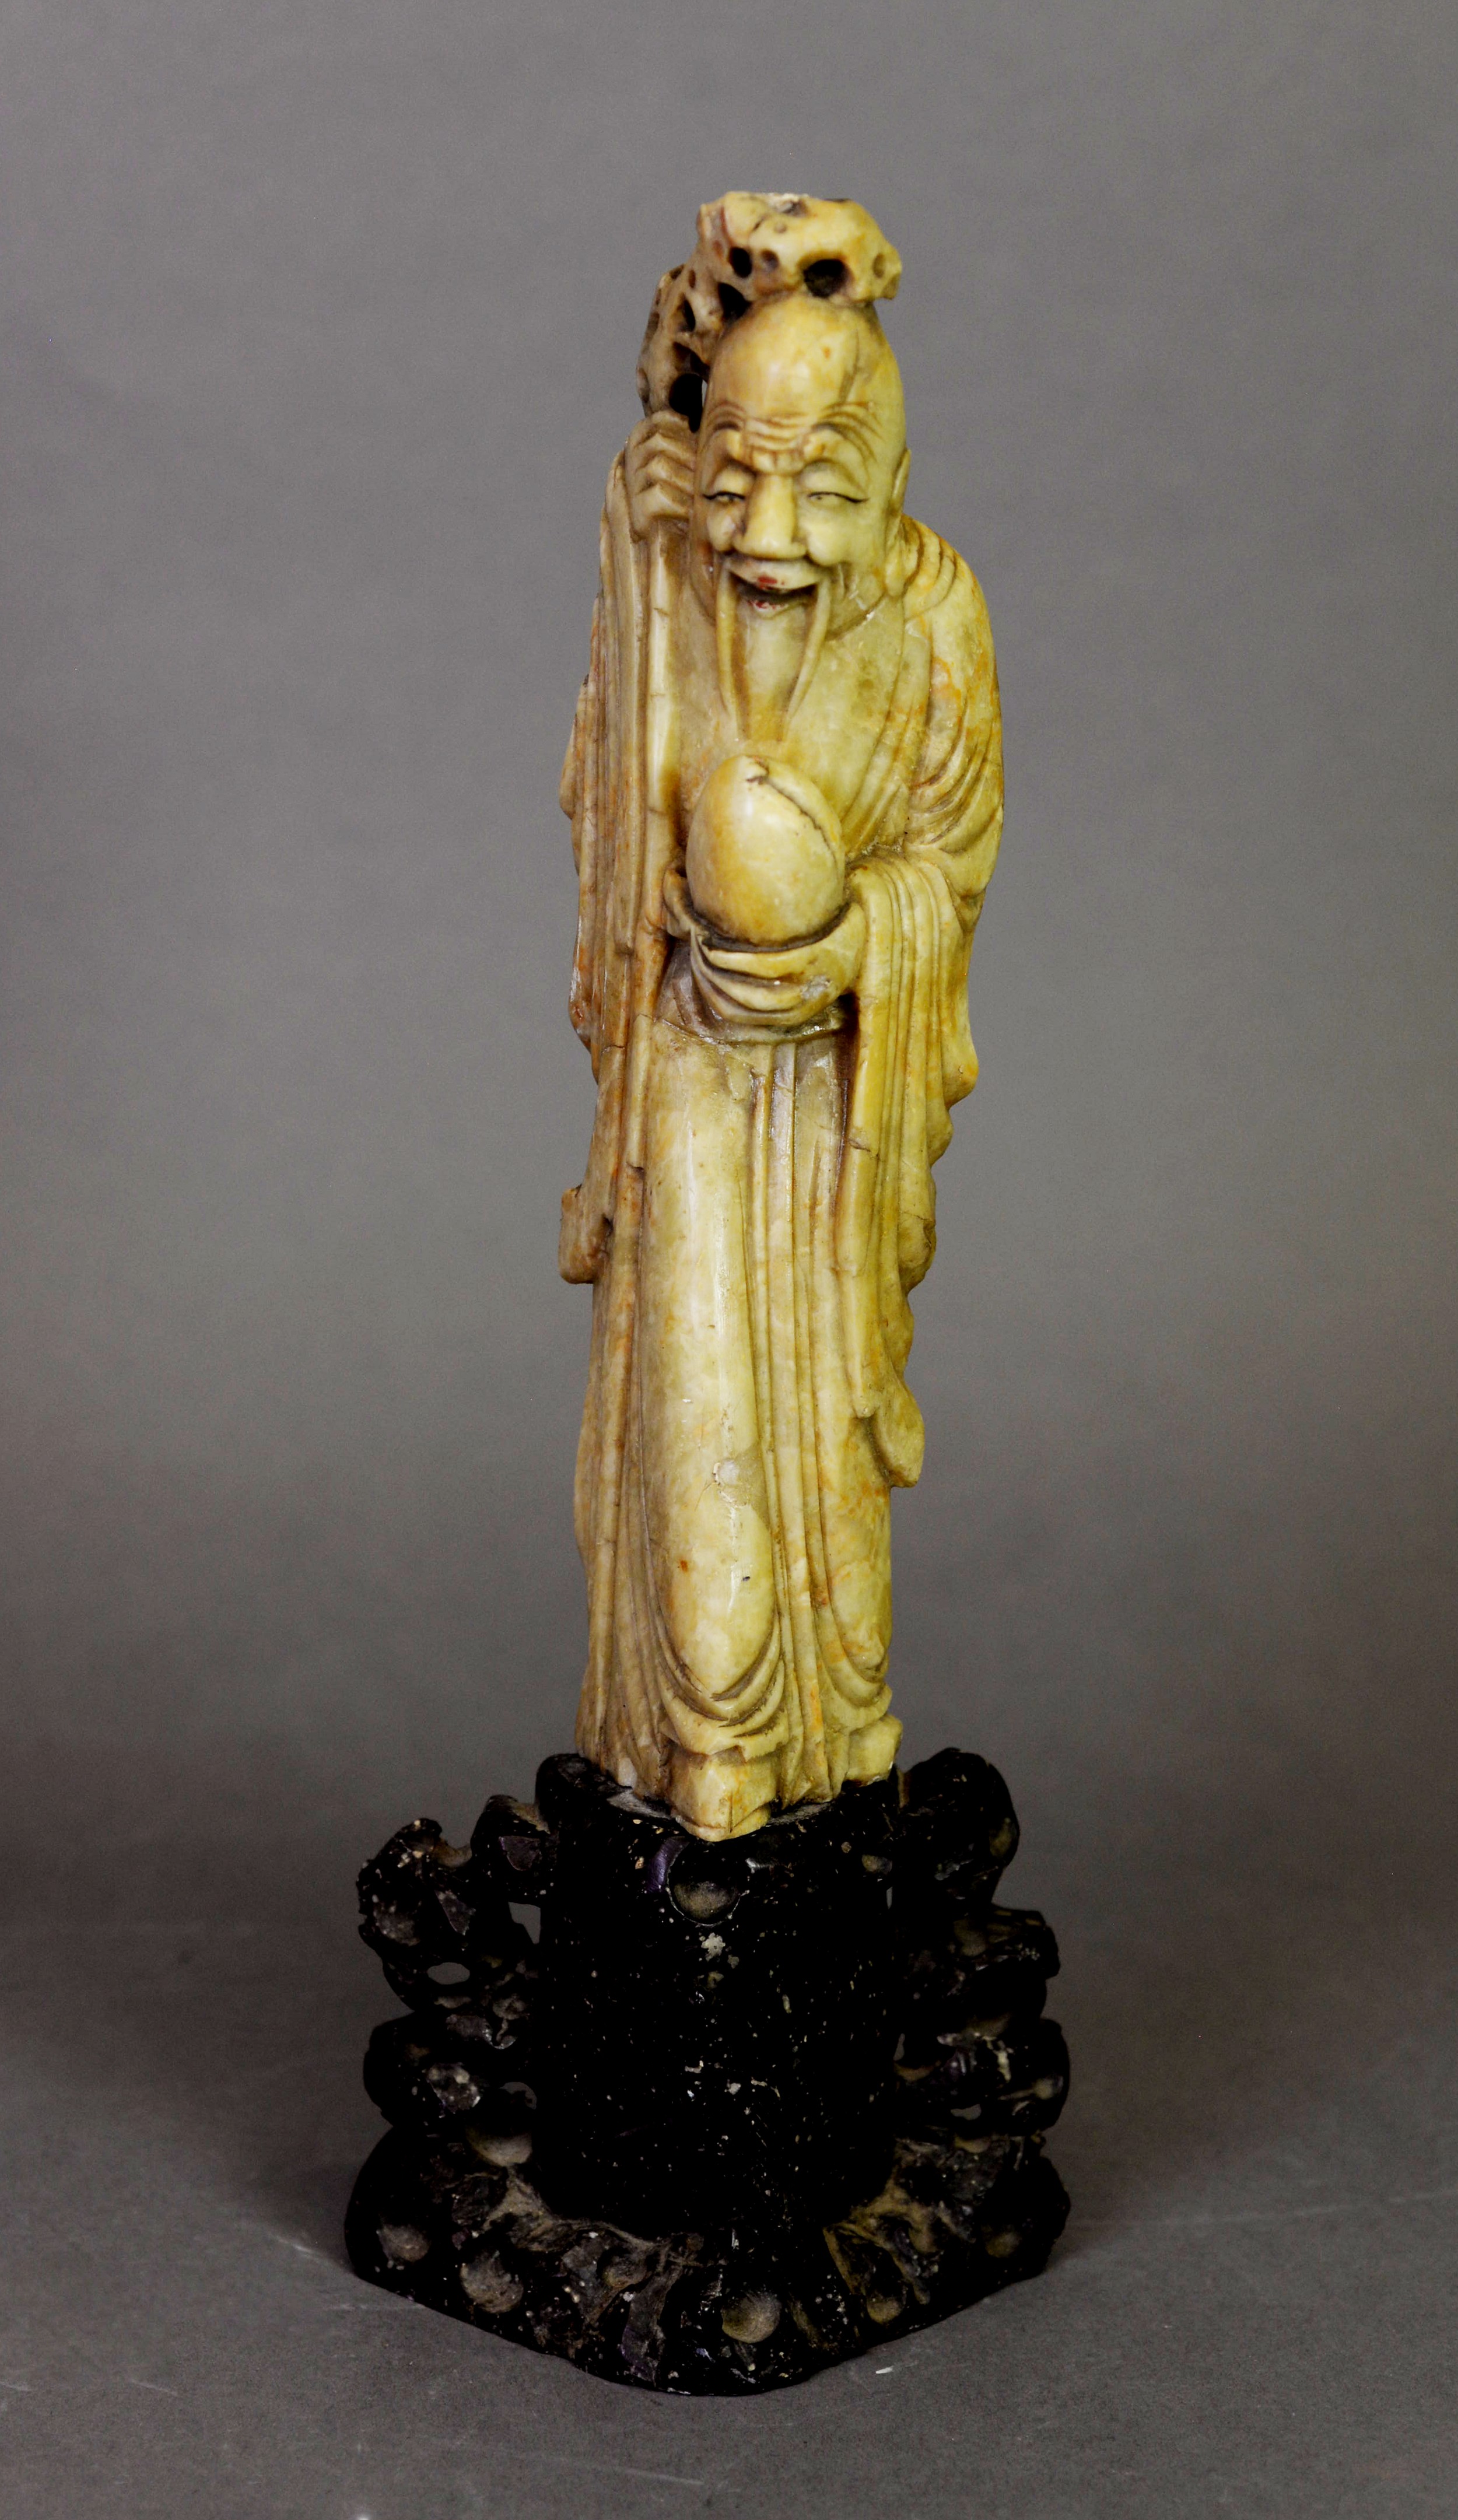 An Chinese fawn soapstone figure of Shoulau, the Chinese immortal of longevity, holding a staff